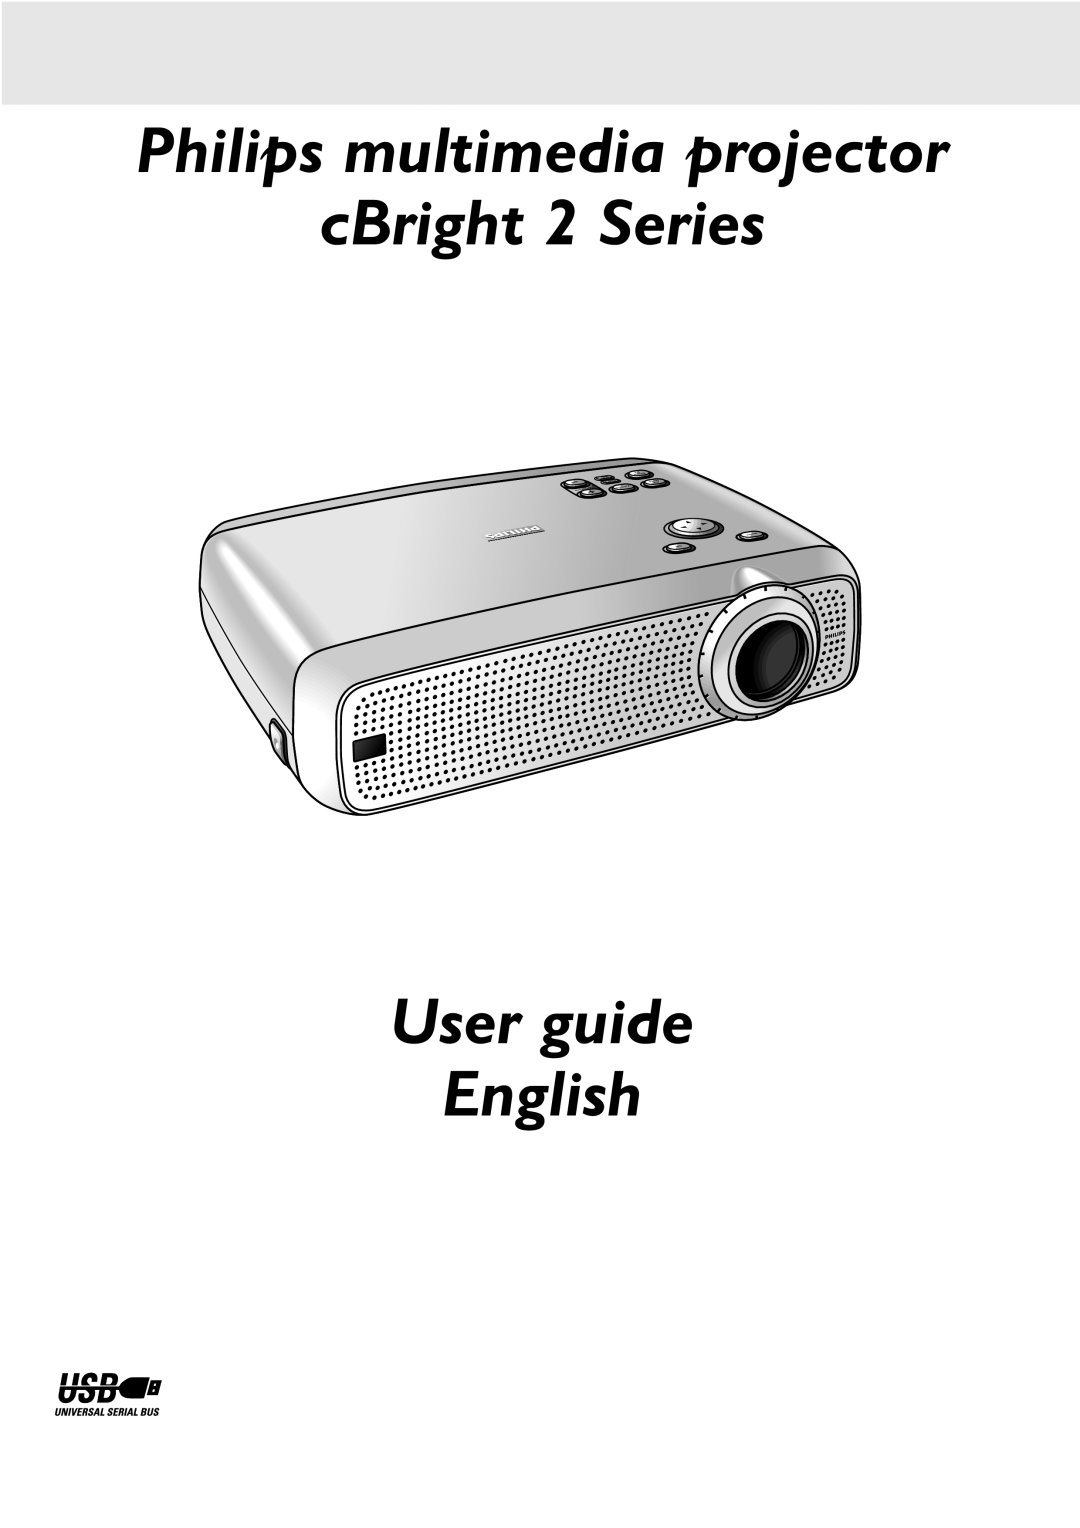 Philips manual Philips multimedia projector cBright 2 Series User guide English 